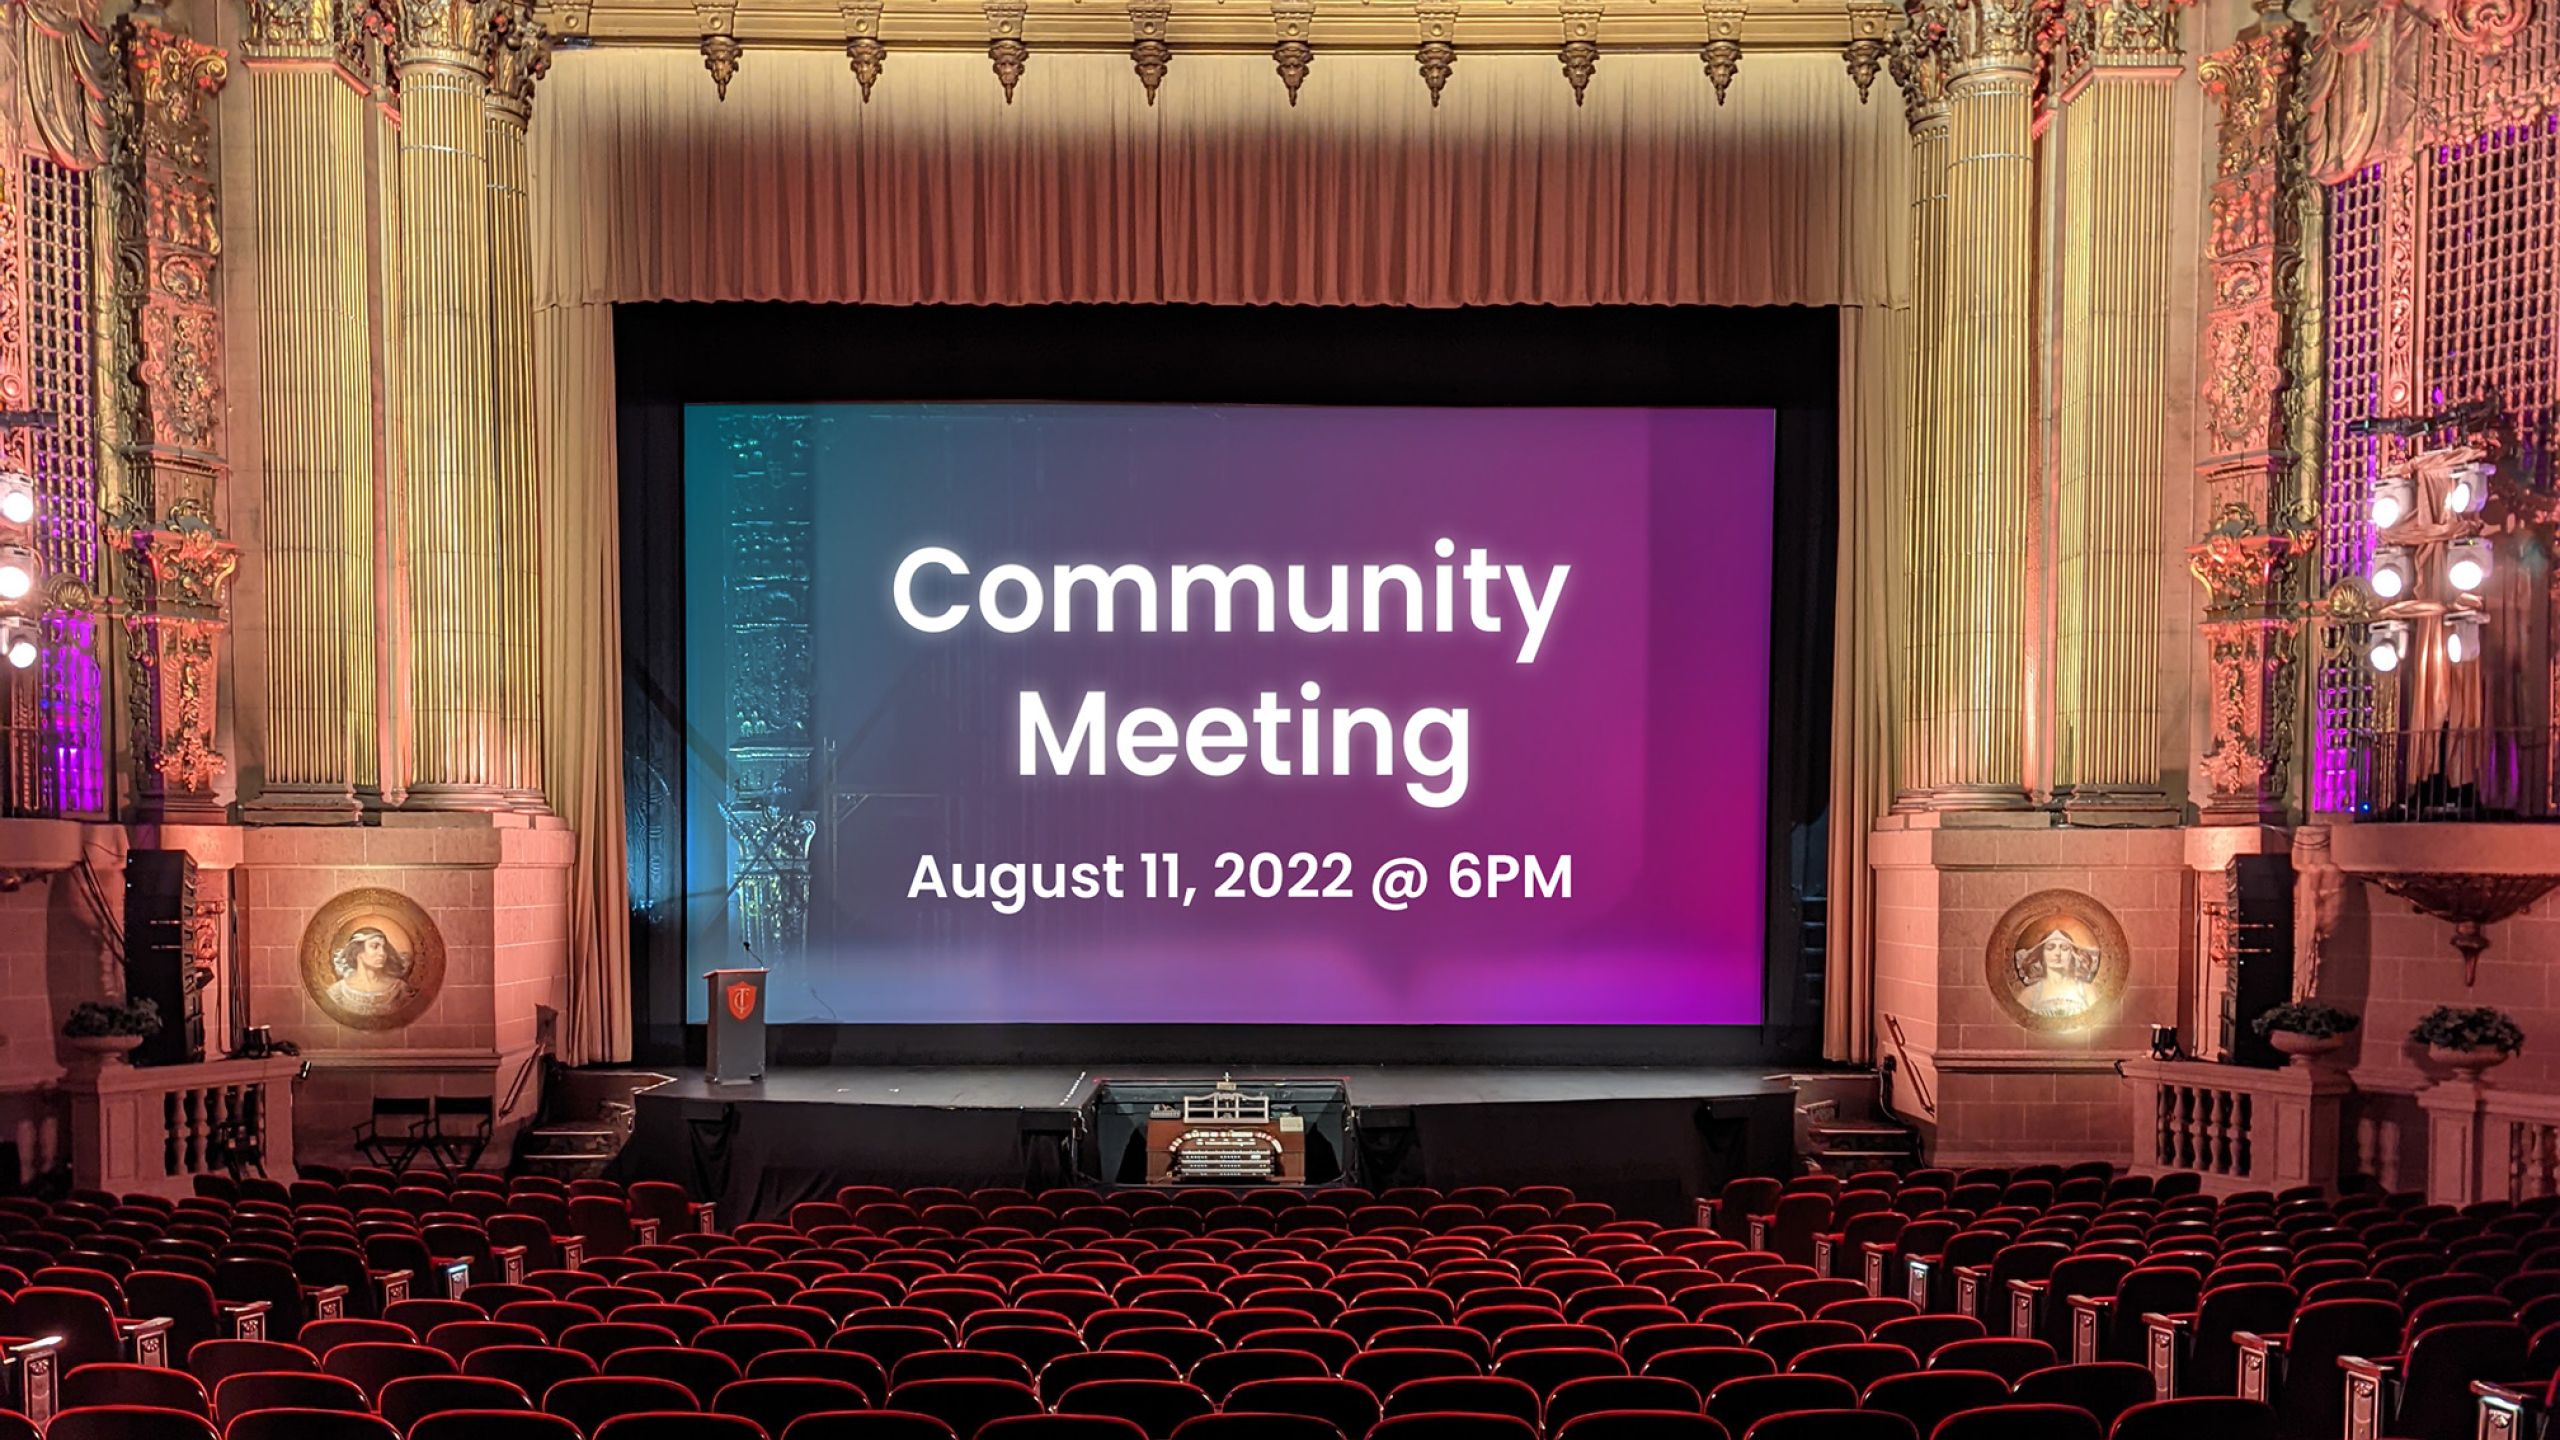 Community Meeting August 11, 2022 @ 6PM